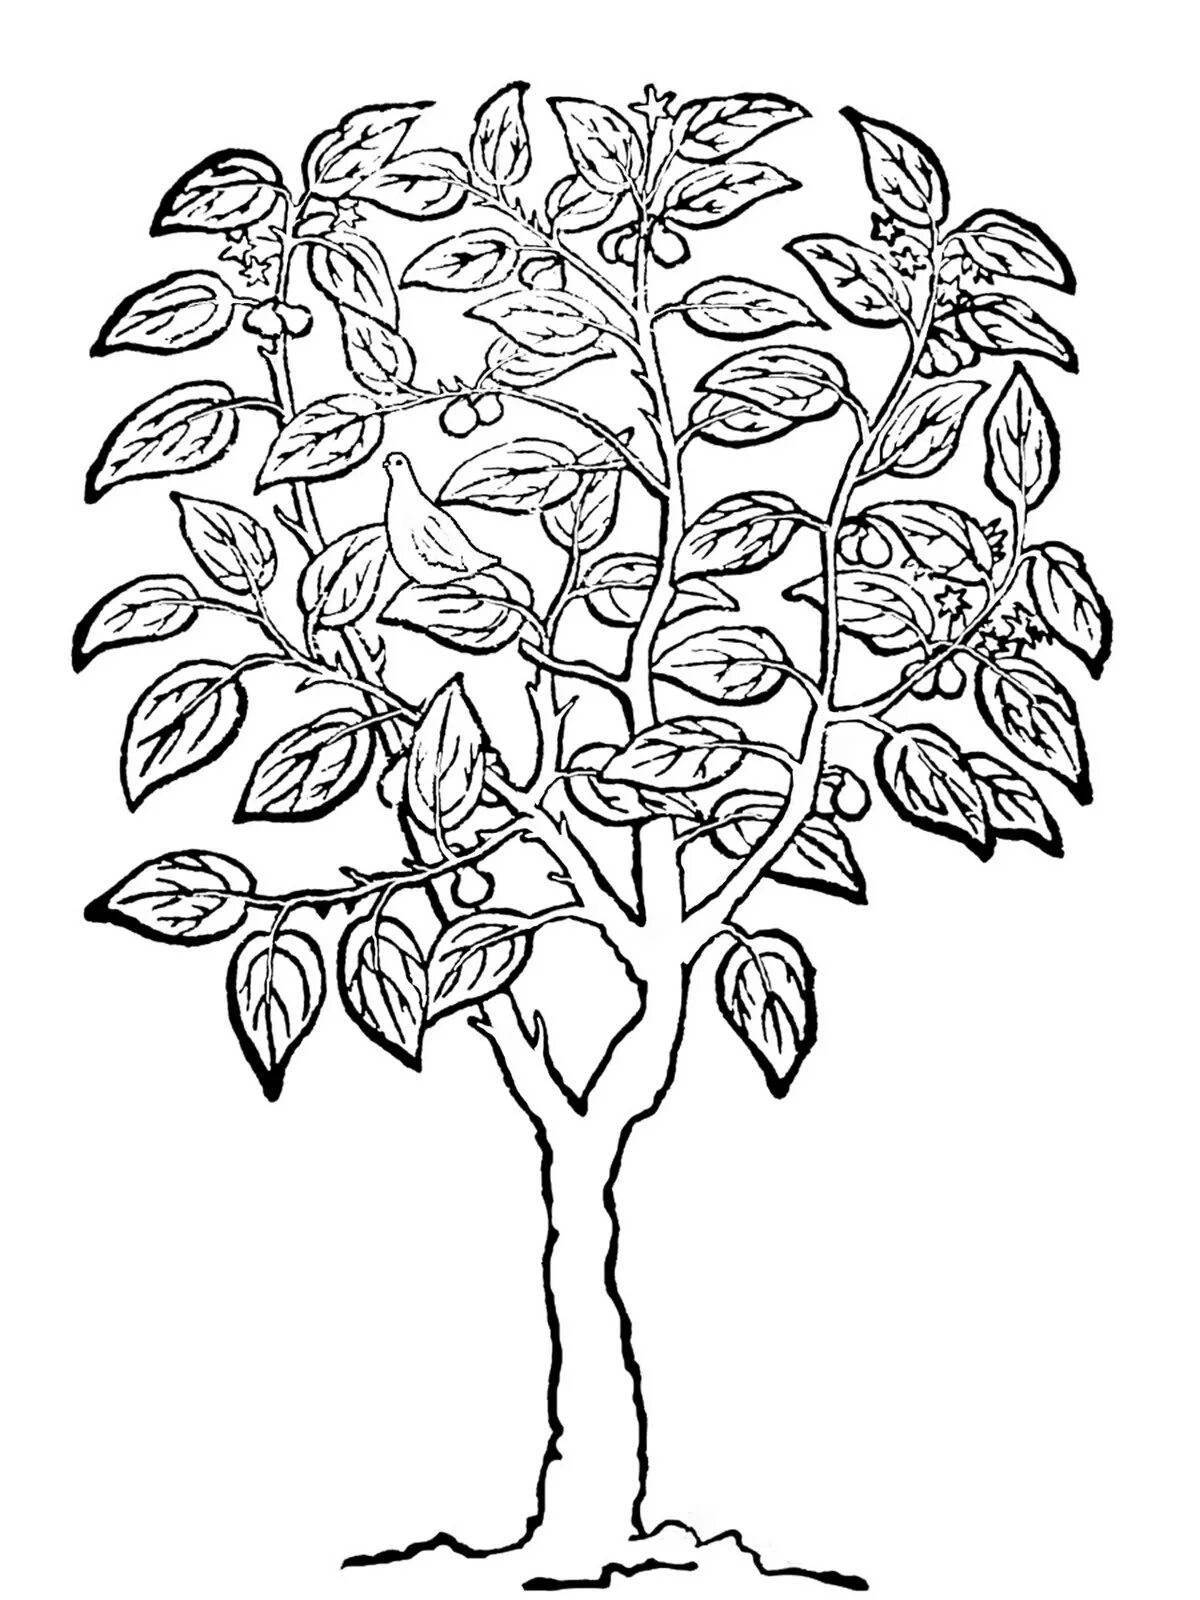 Glowing pear coloring page